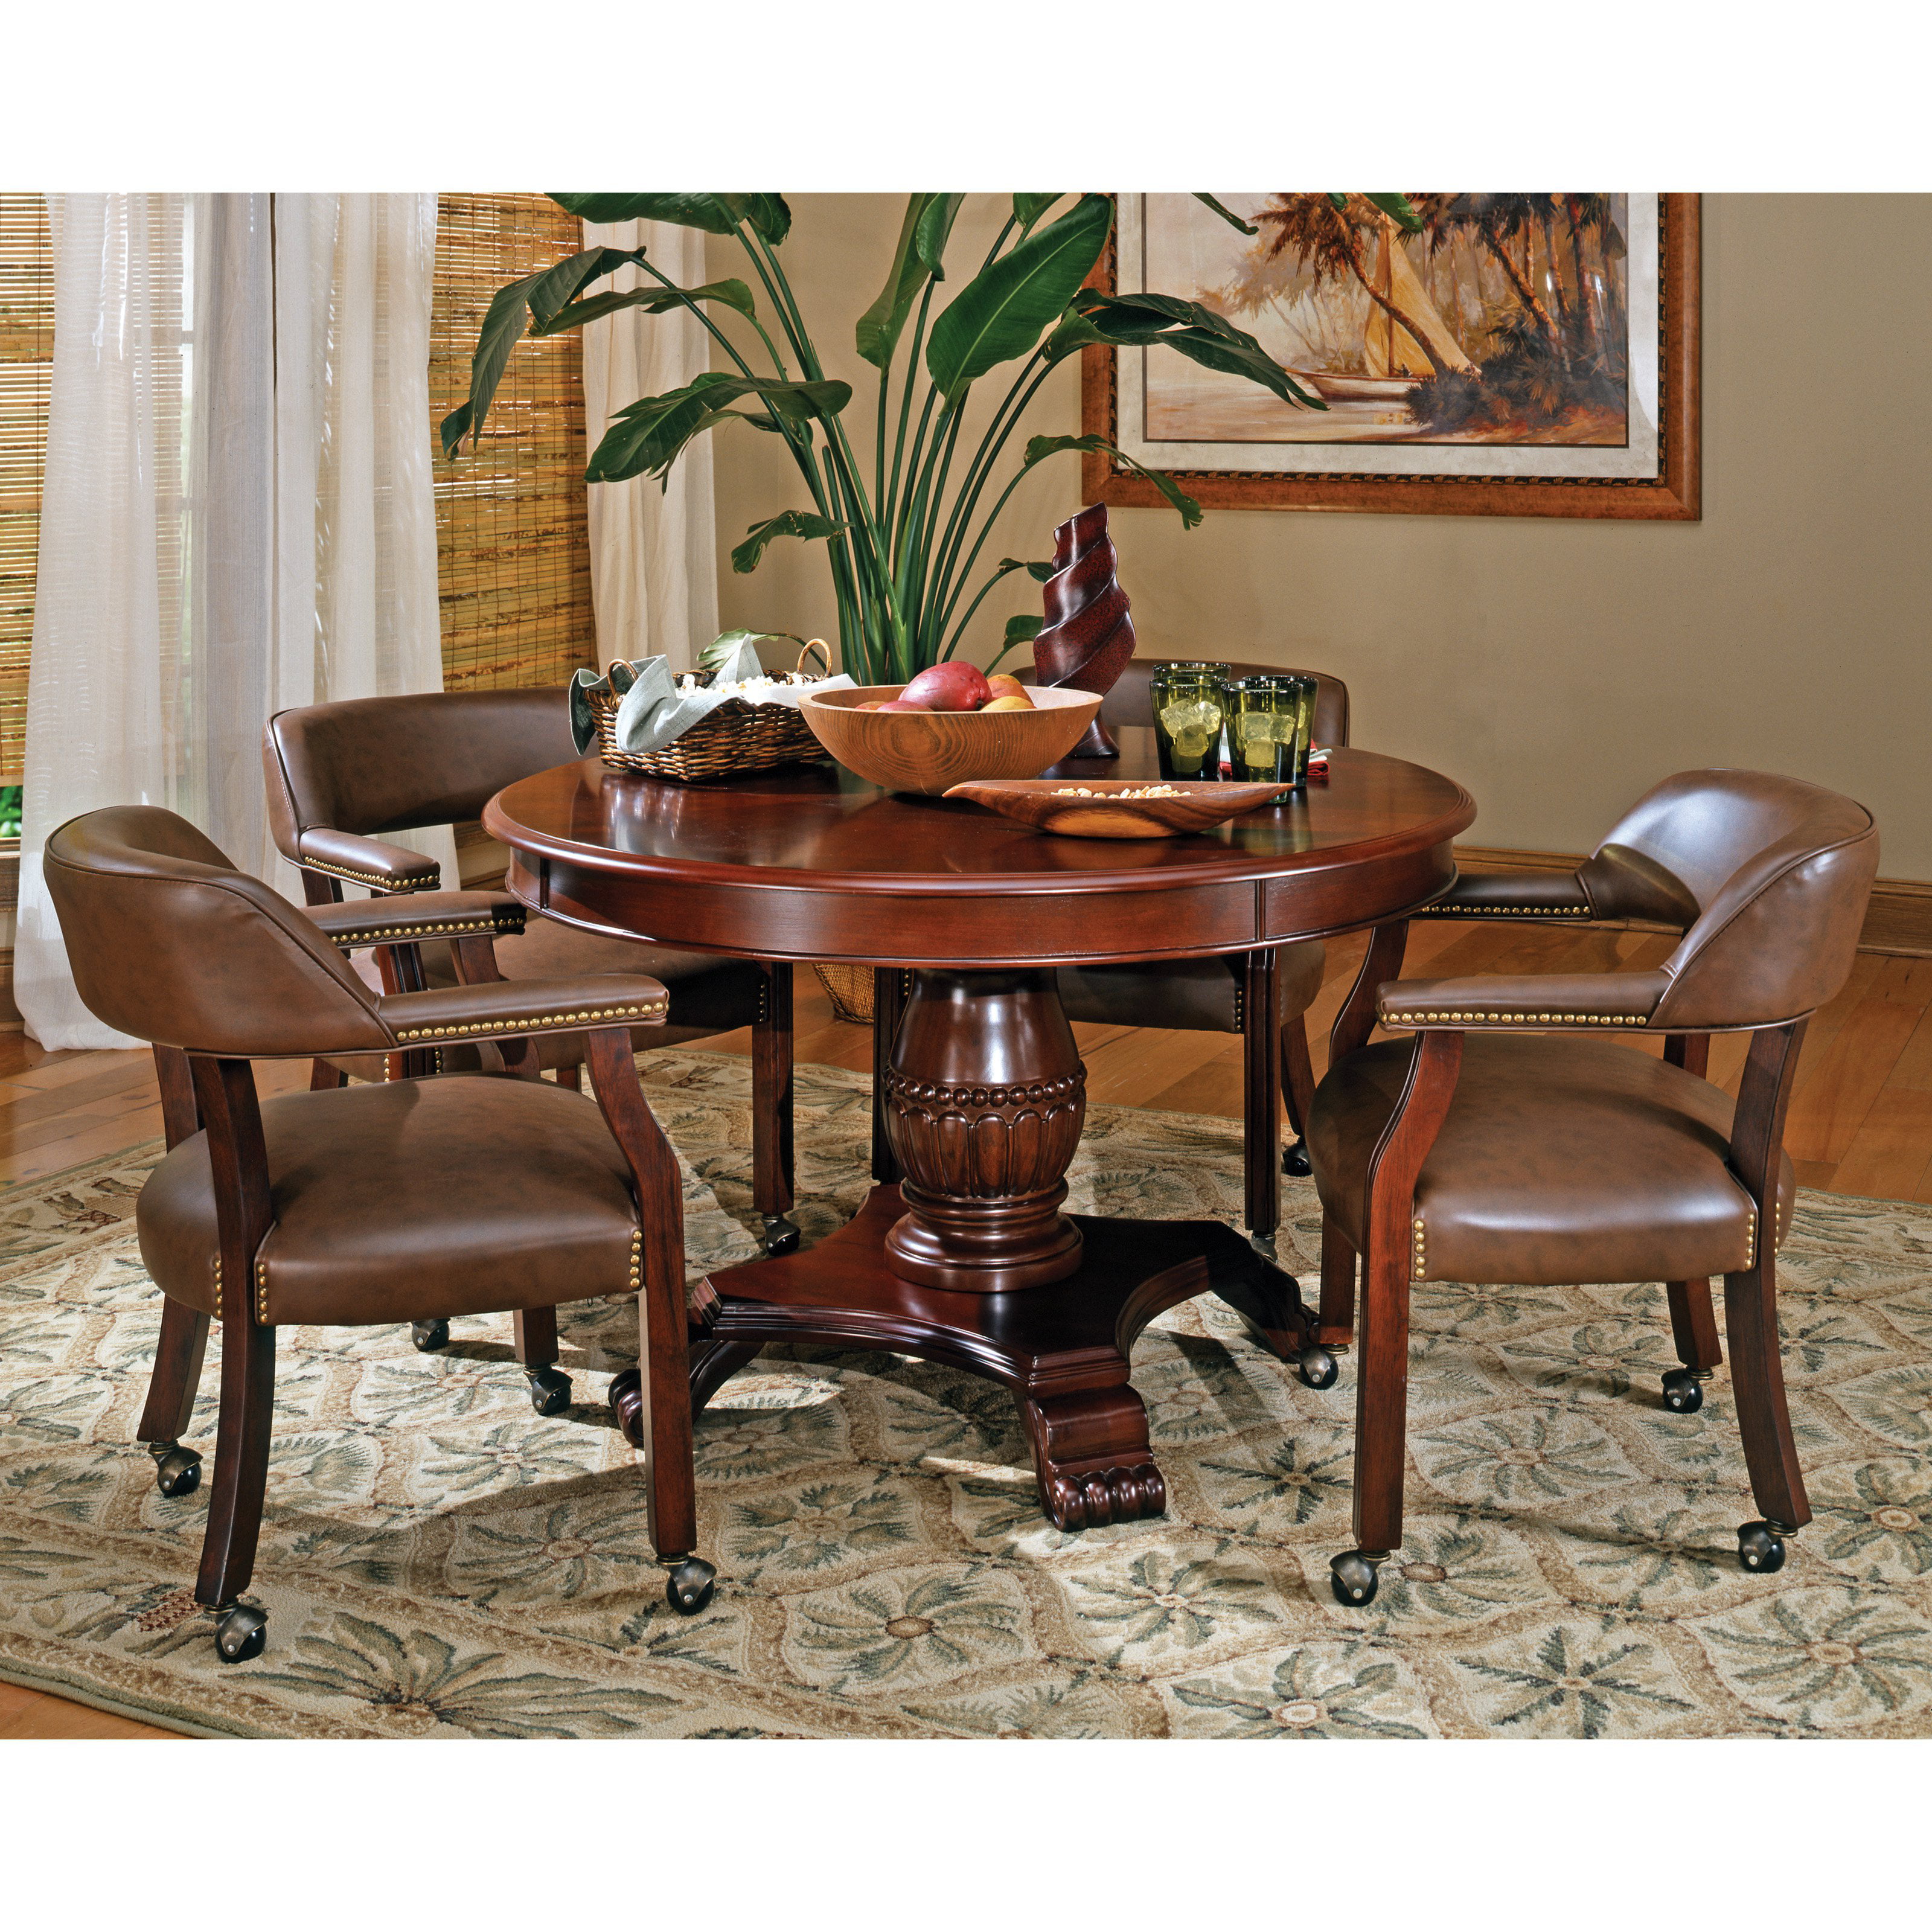 Steve Silver Tournament Arm Chairs With, Leather Dining Room Chairs With Wheels